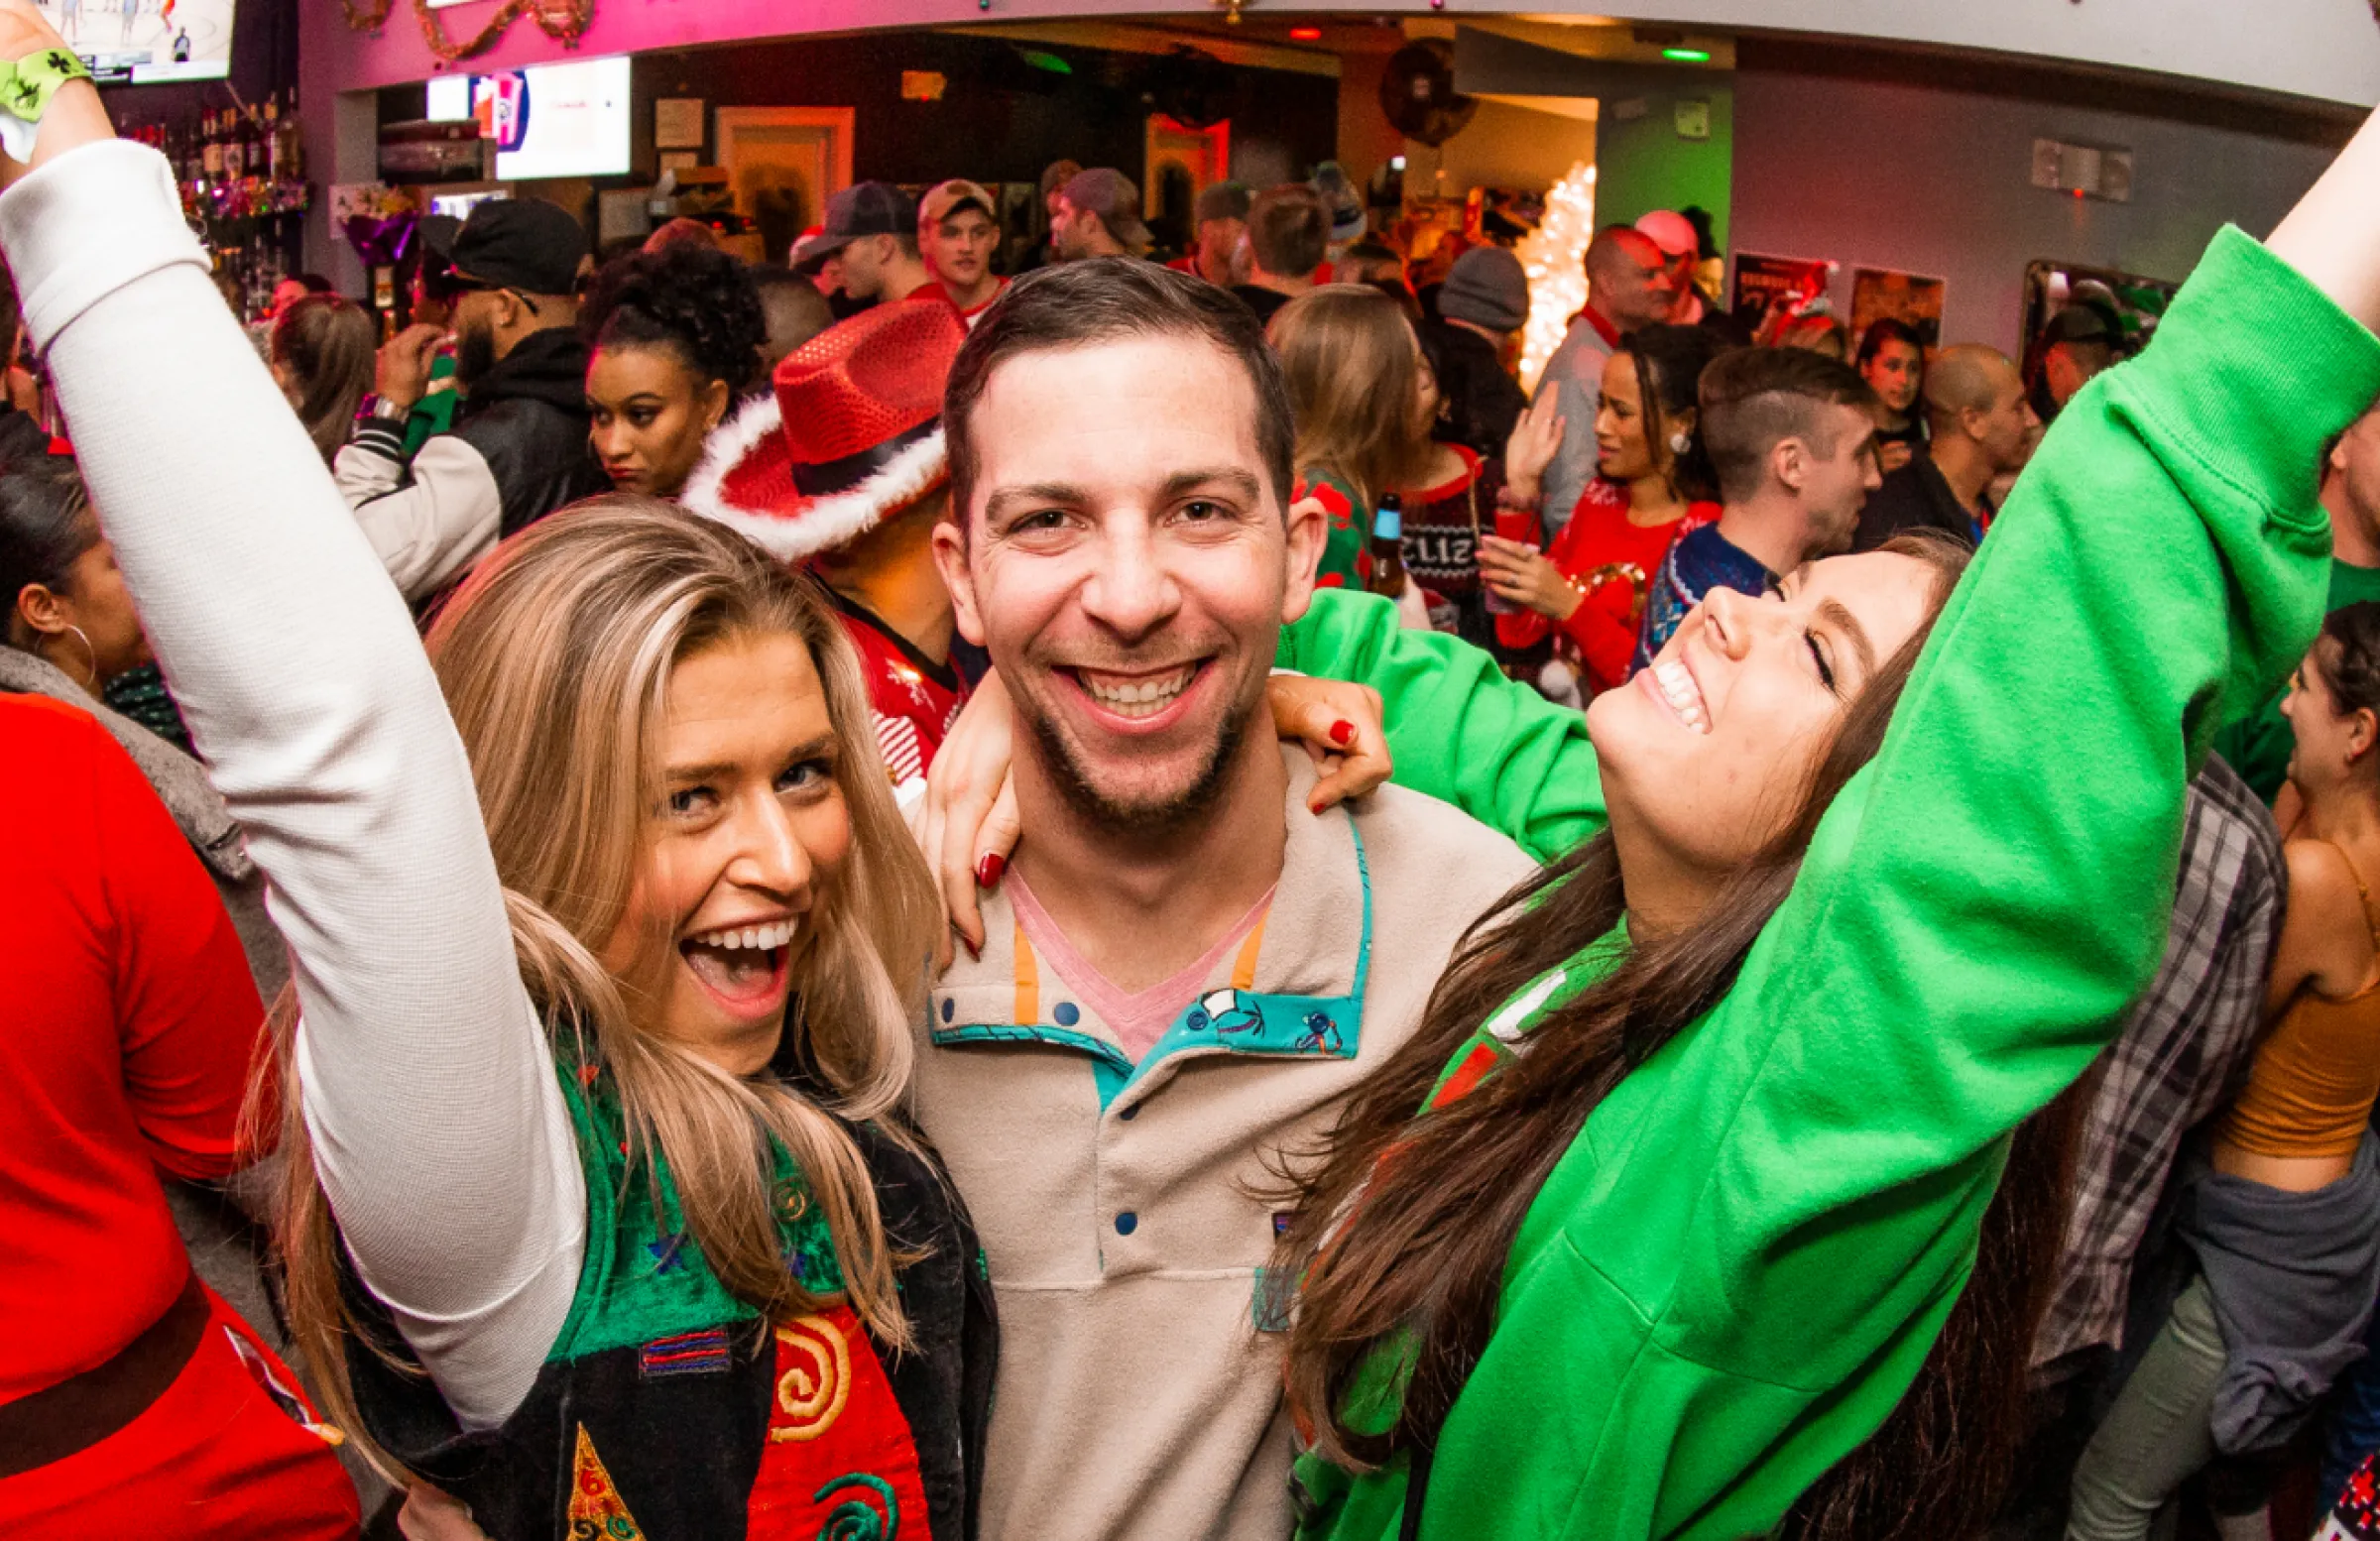 a guy and two girls pose for a picture during the a holiday themed bar crawl